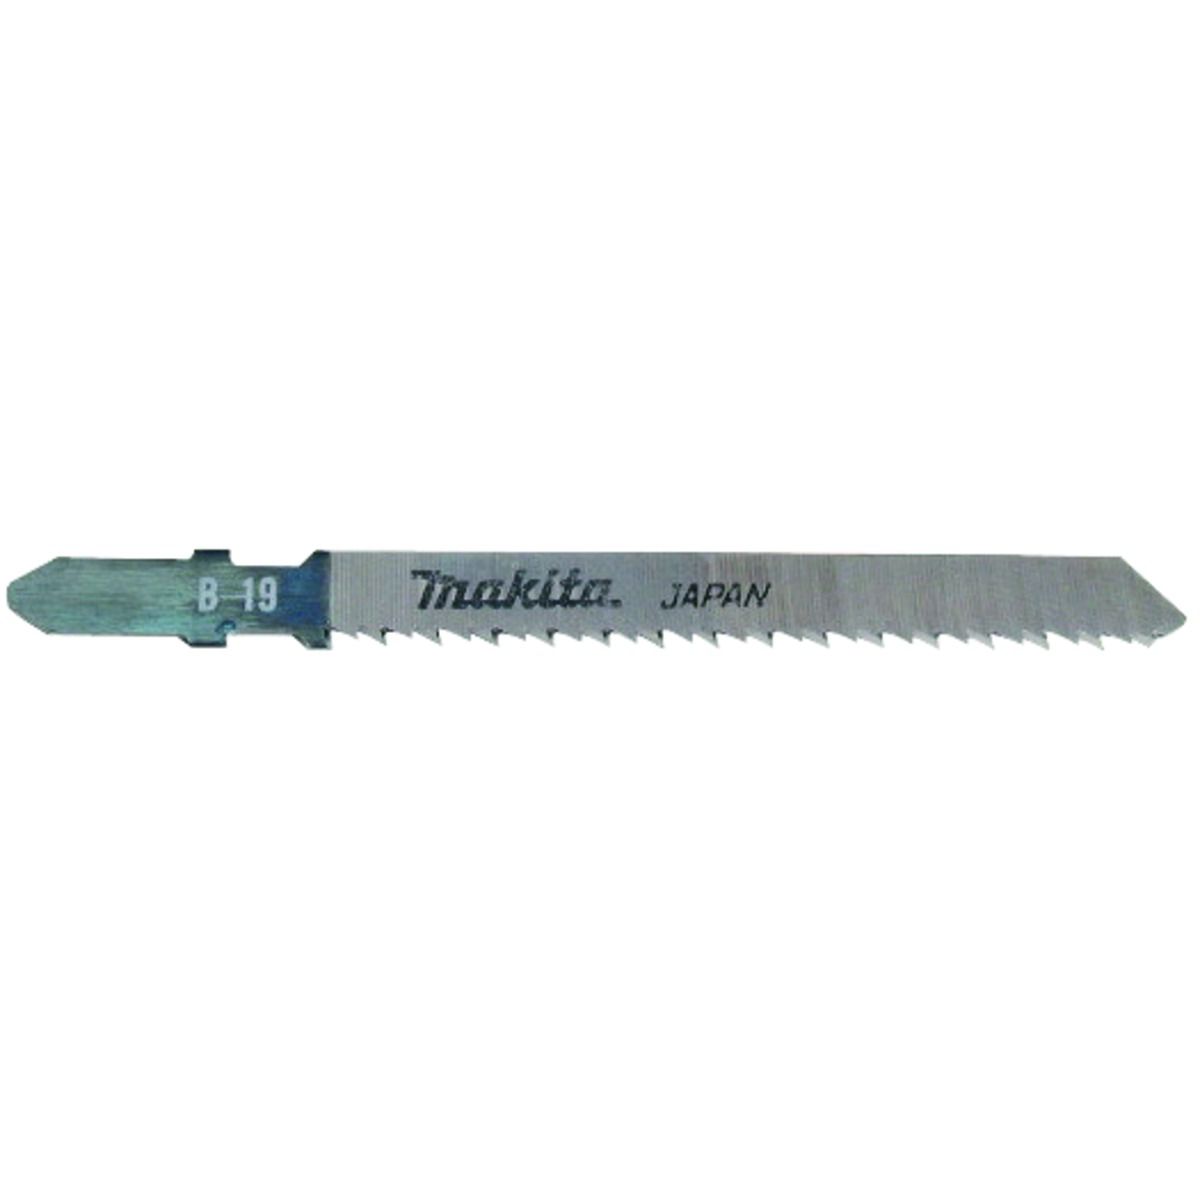 Makita A-85715 Jigsaw Blades for Laminate Wood - Pack of 5